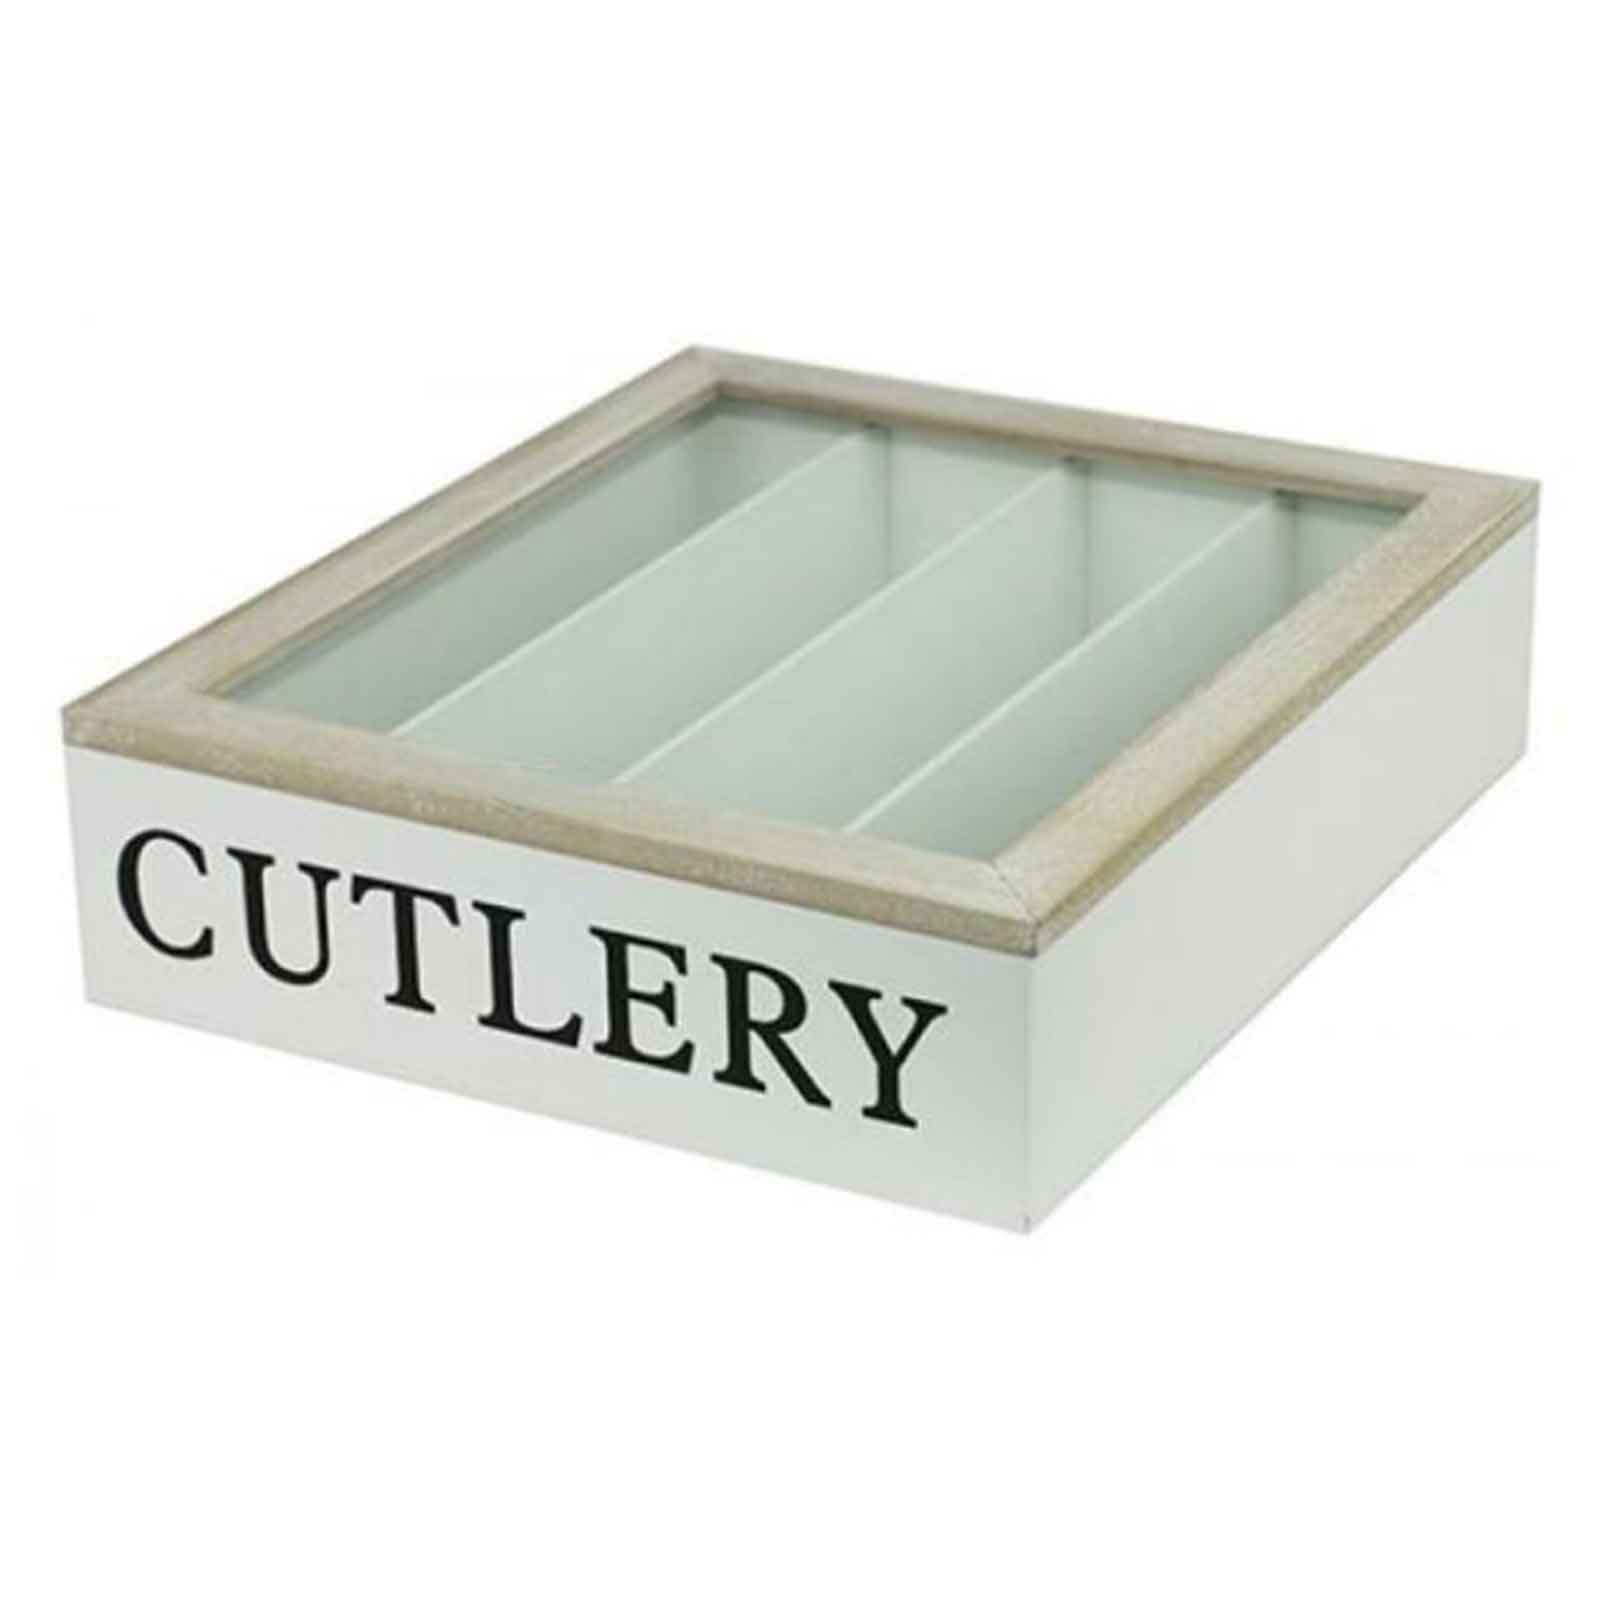 Cutlery Storage Box - 4 compartments